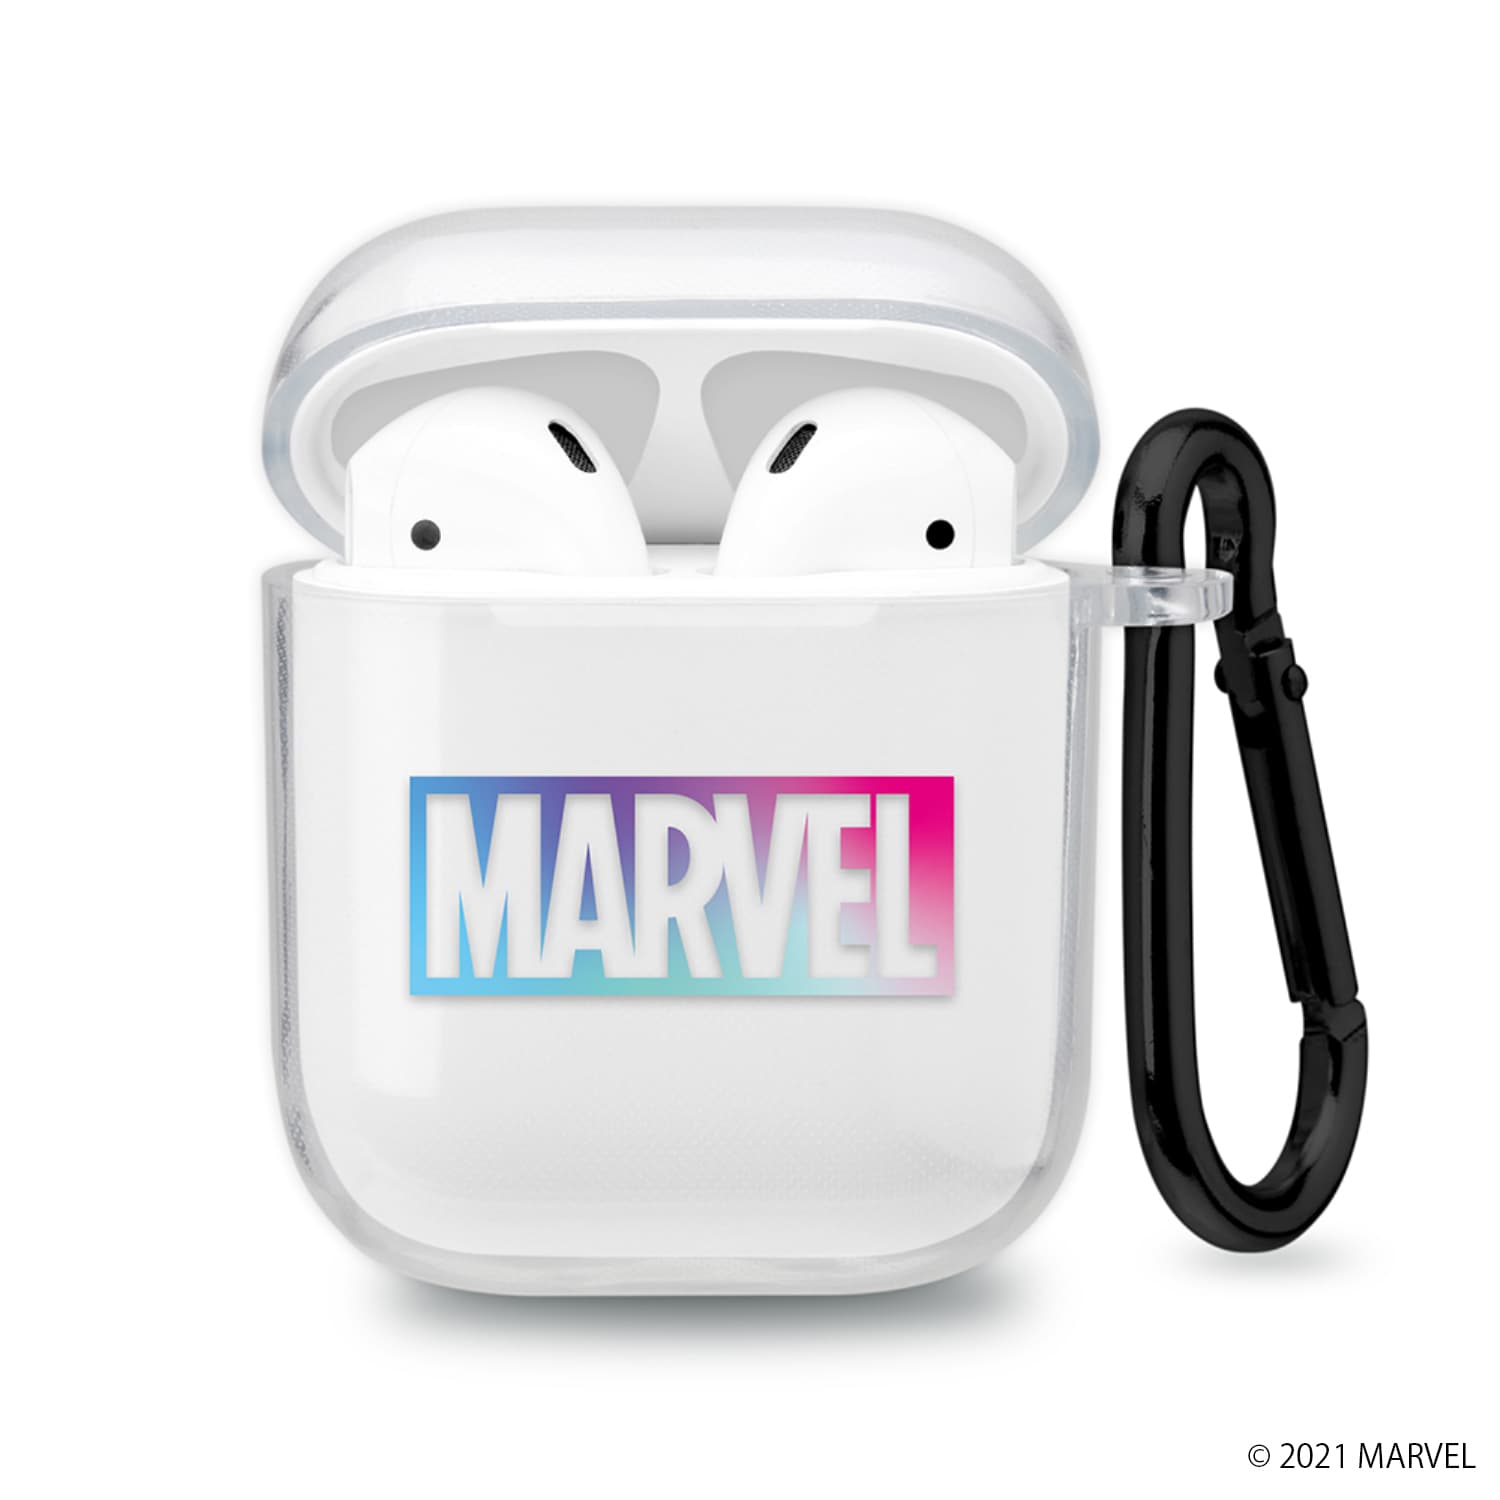 MARVEL】AirPods Pro・AirPods 充電ケース用 抗菌ソフトケース ｜ 株式 